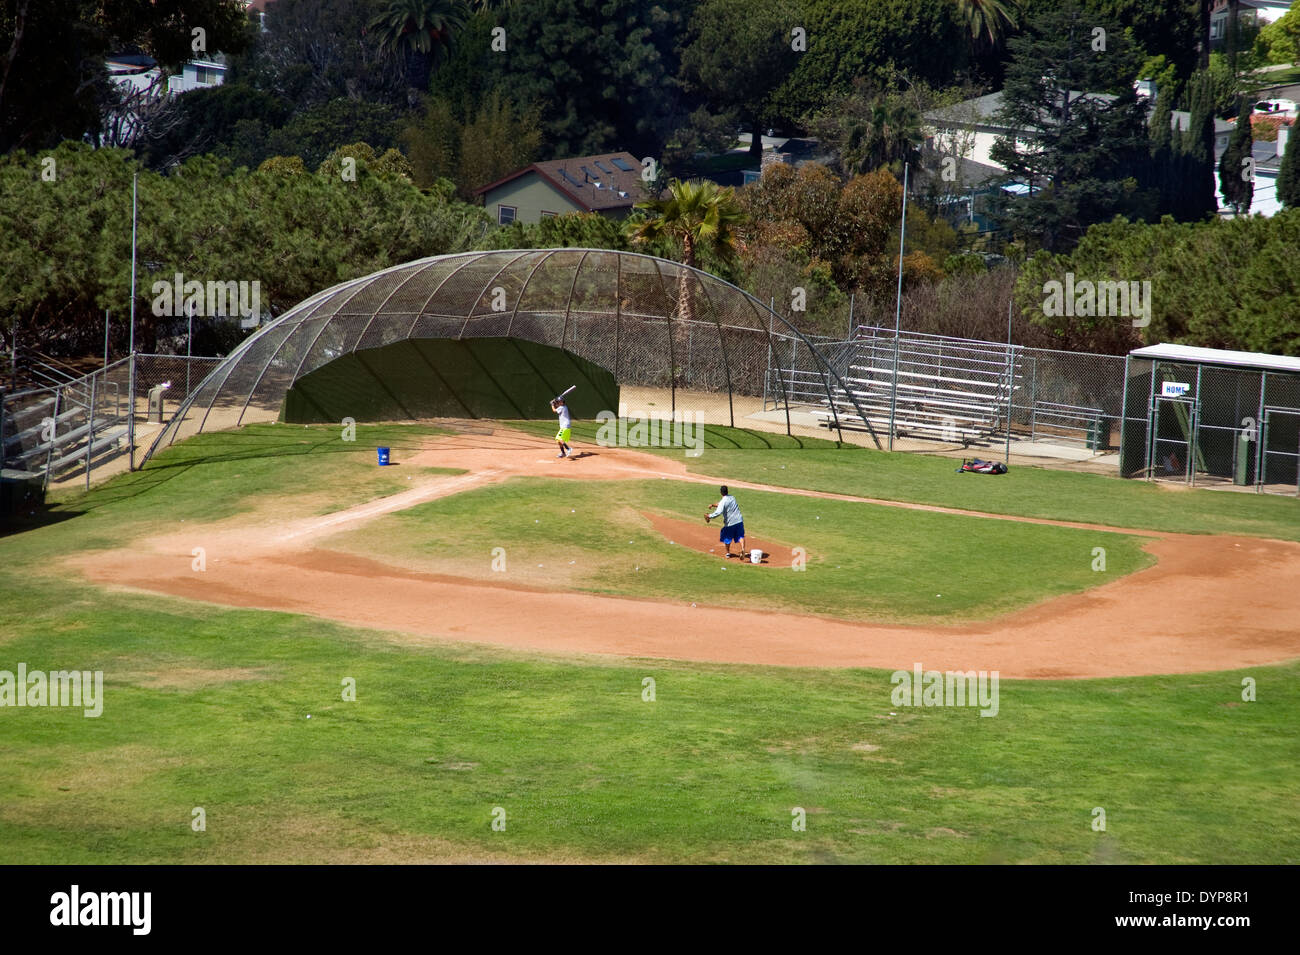 Father pitching baseball to son in park Stock Photo